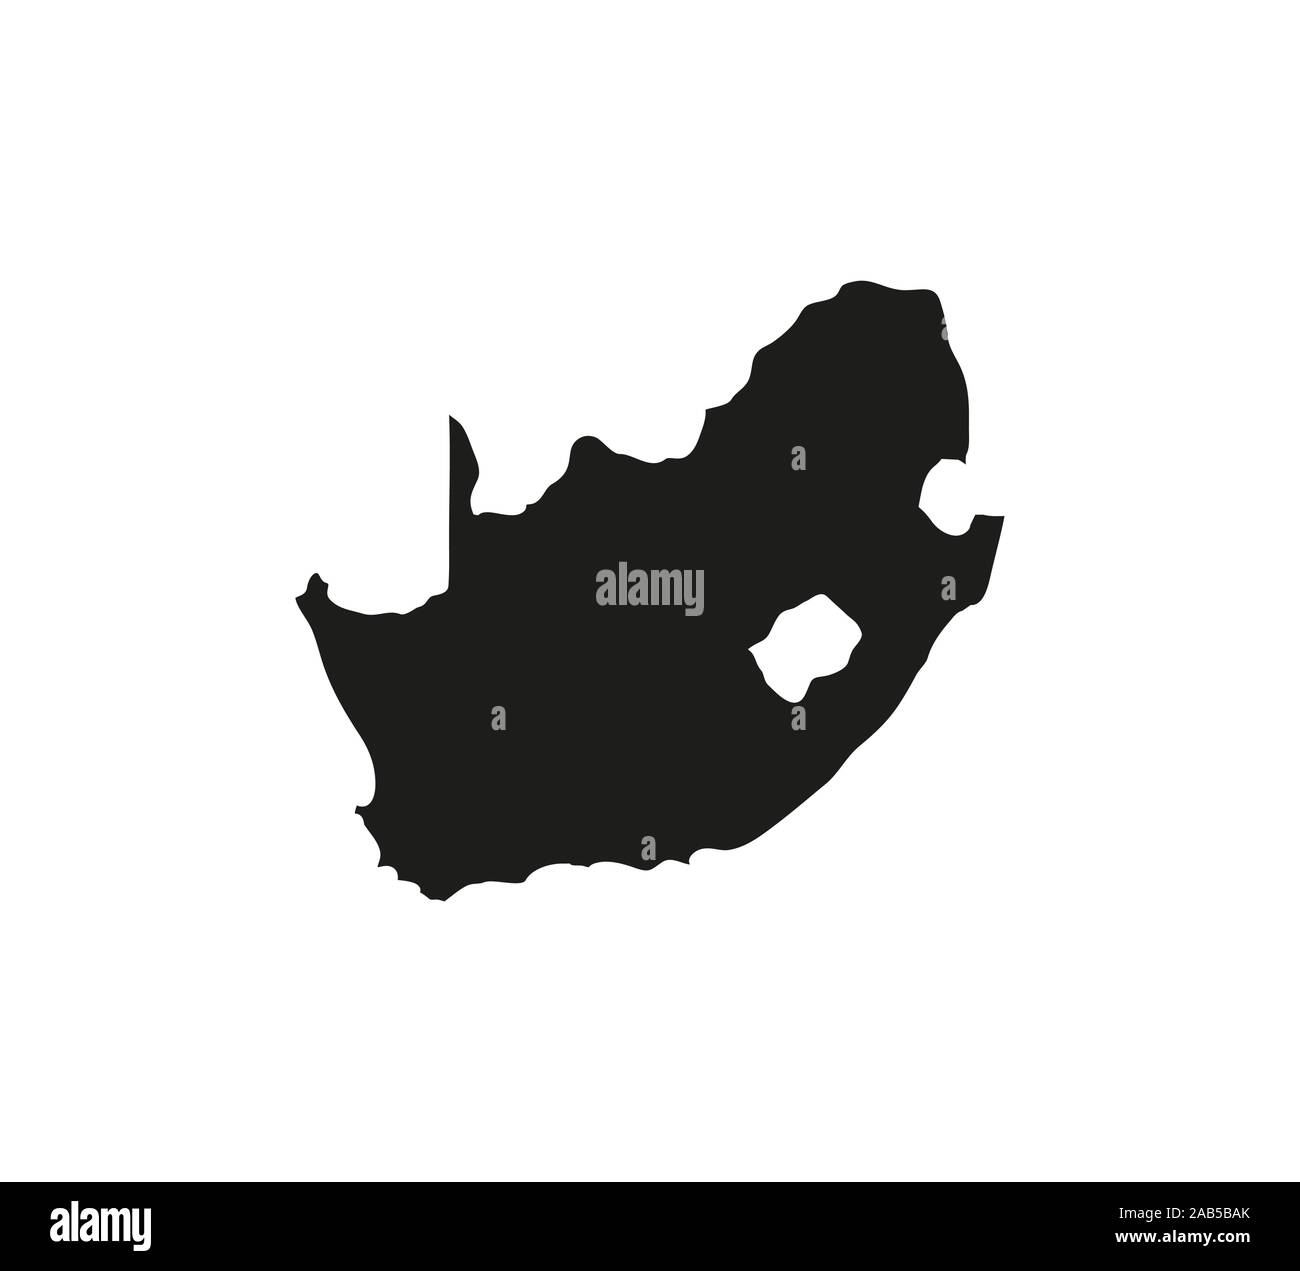 South Africa Map, on white background. Vector illustration. Stock Vector